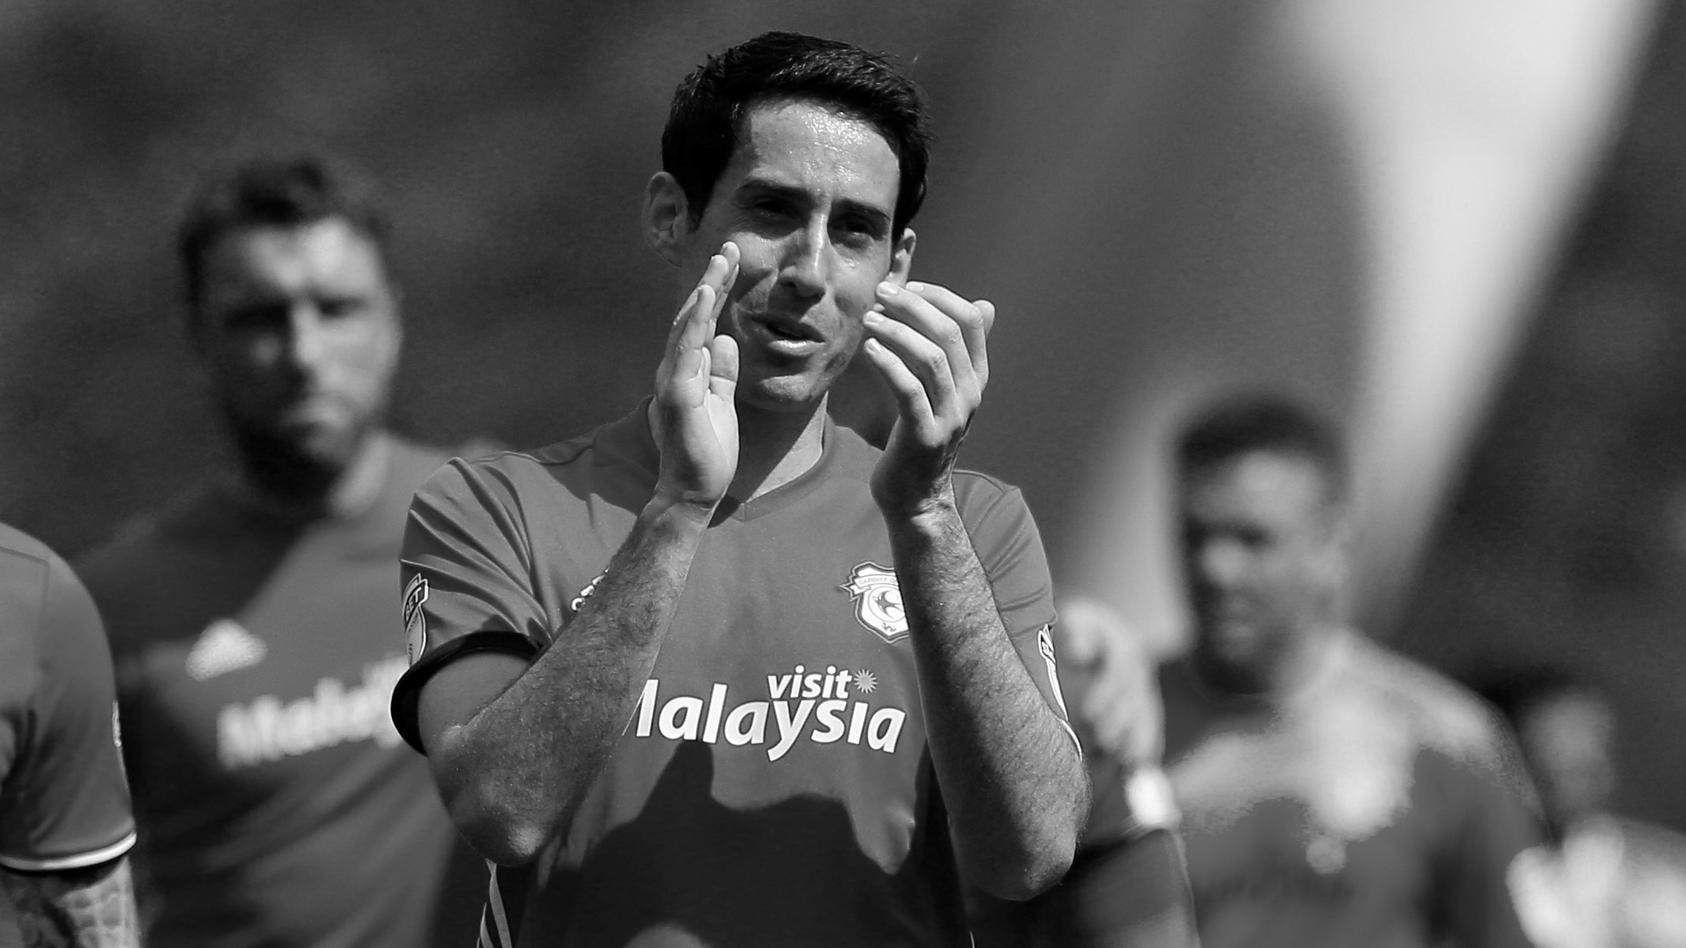 Cardiff City's Peter Whittingham applauds the fans after the match